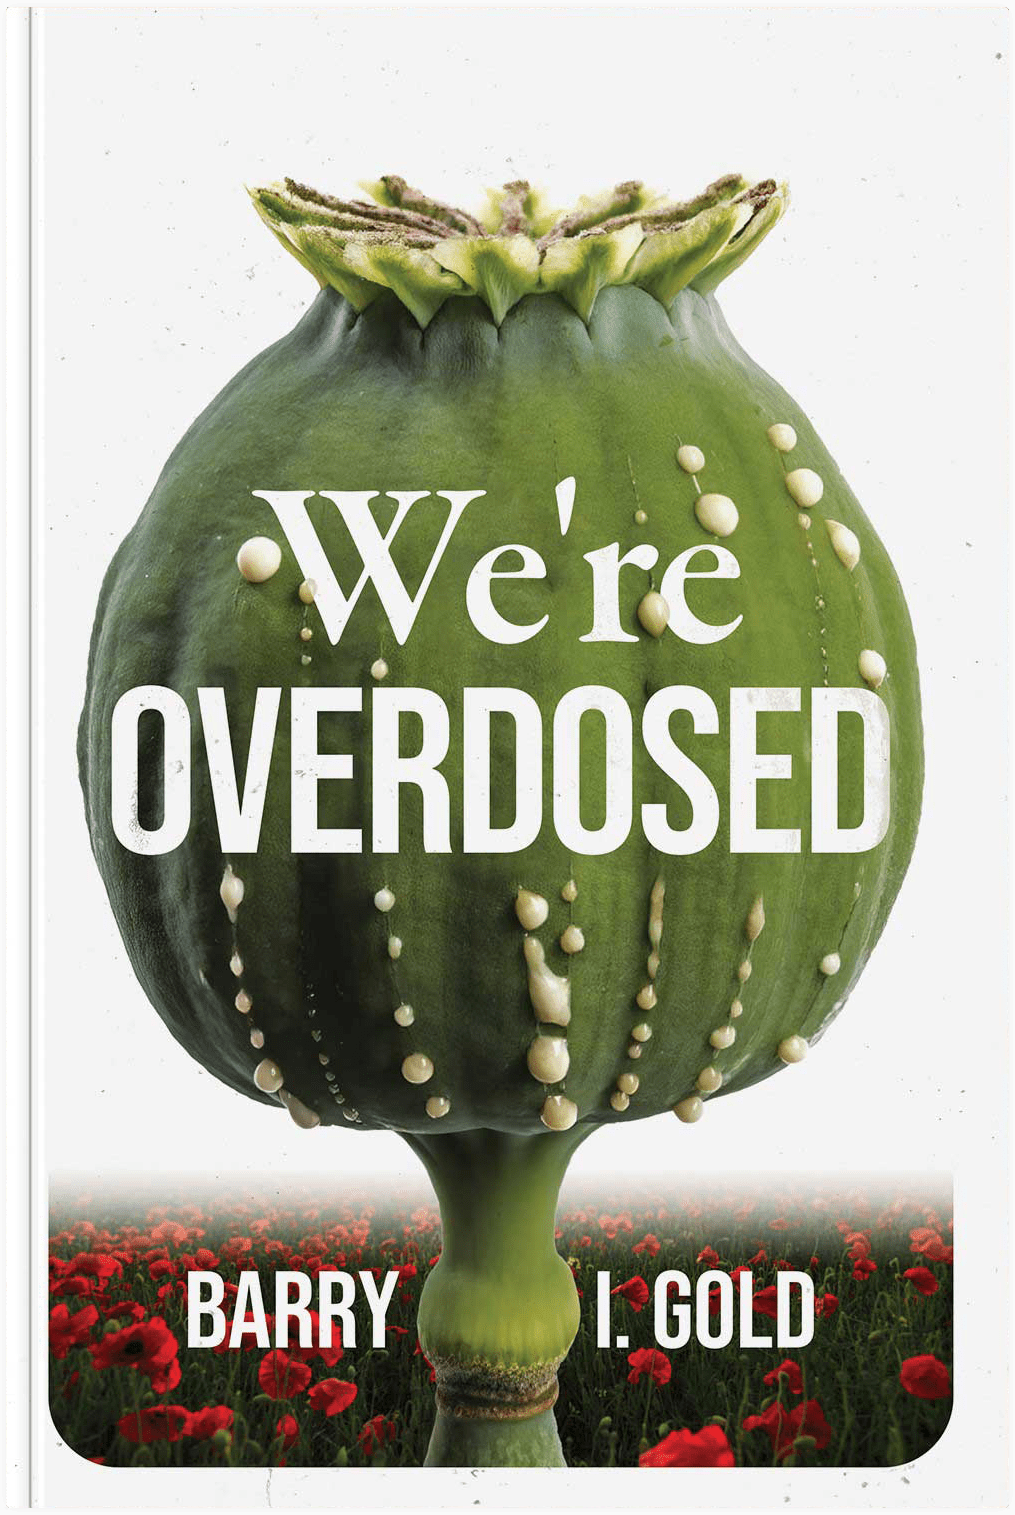 book cover we're overdosed